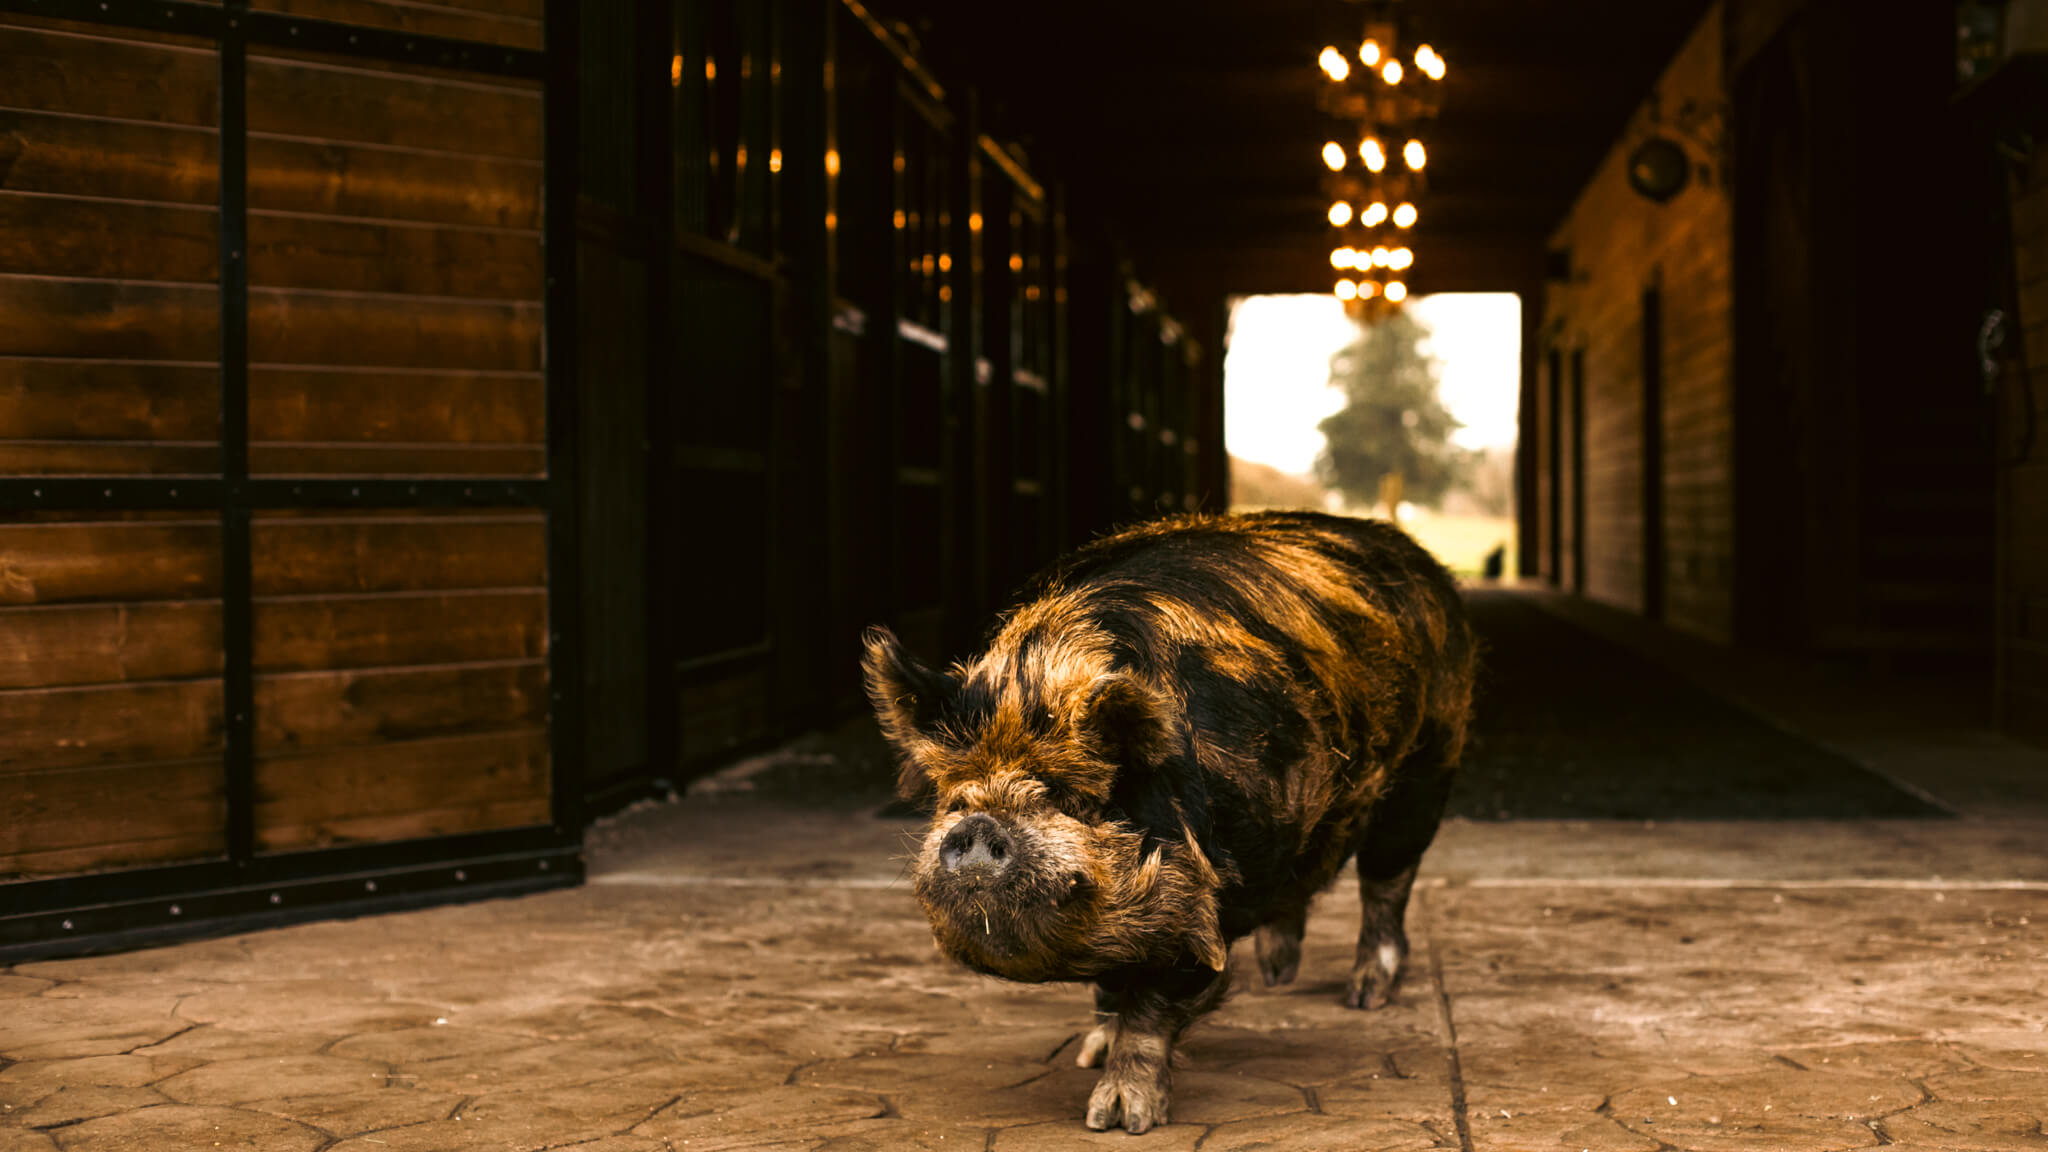 Prize Winning Pig - Photographed for Klassen Wood Co Wood Chips for farm animals - Photography by Vancouver Photographer Rob Trendiak